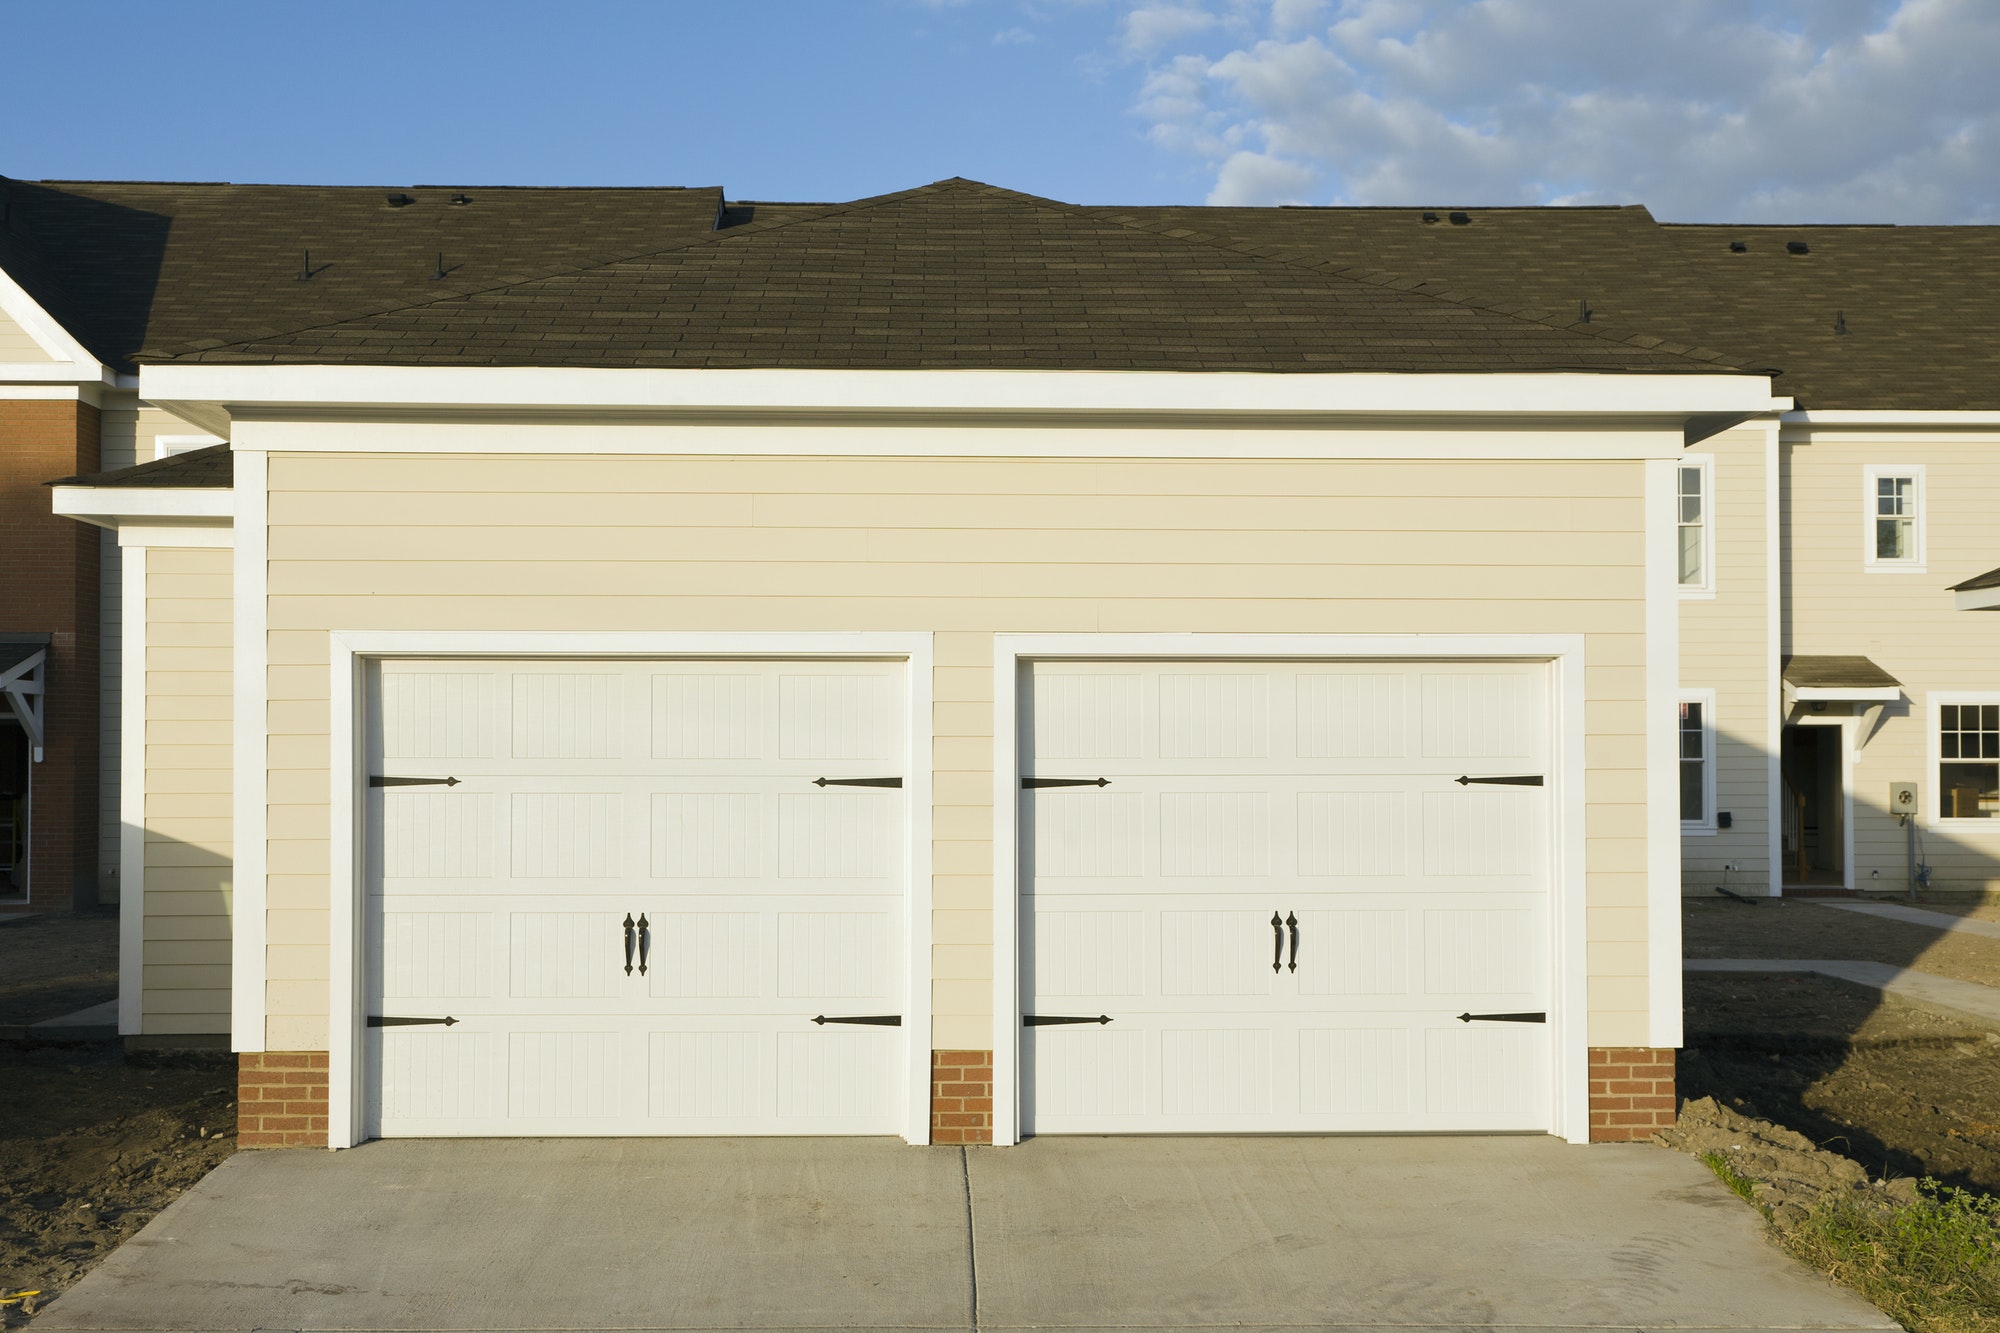 Townhouse Garages in Edmonton Done by Jae's Anything Garage